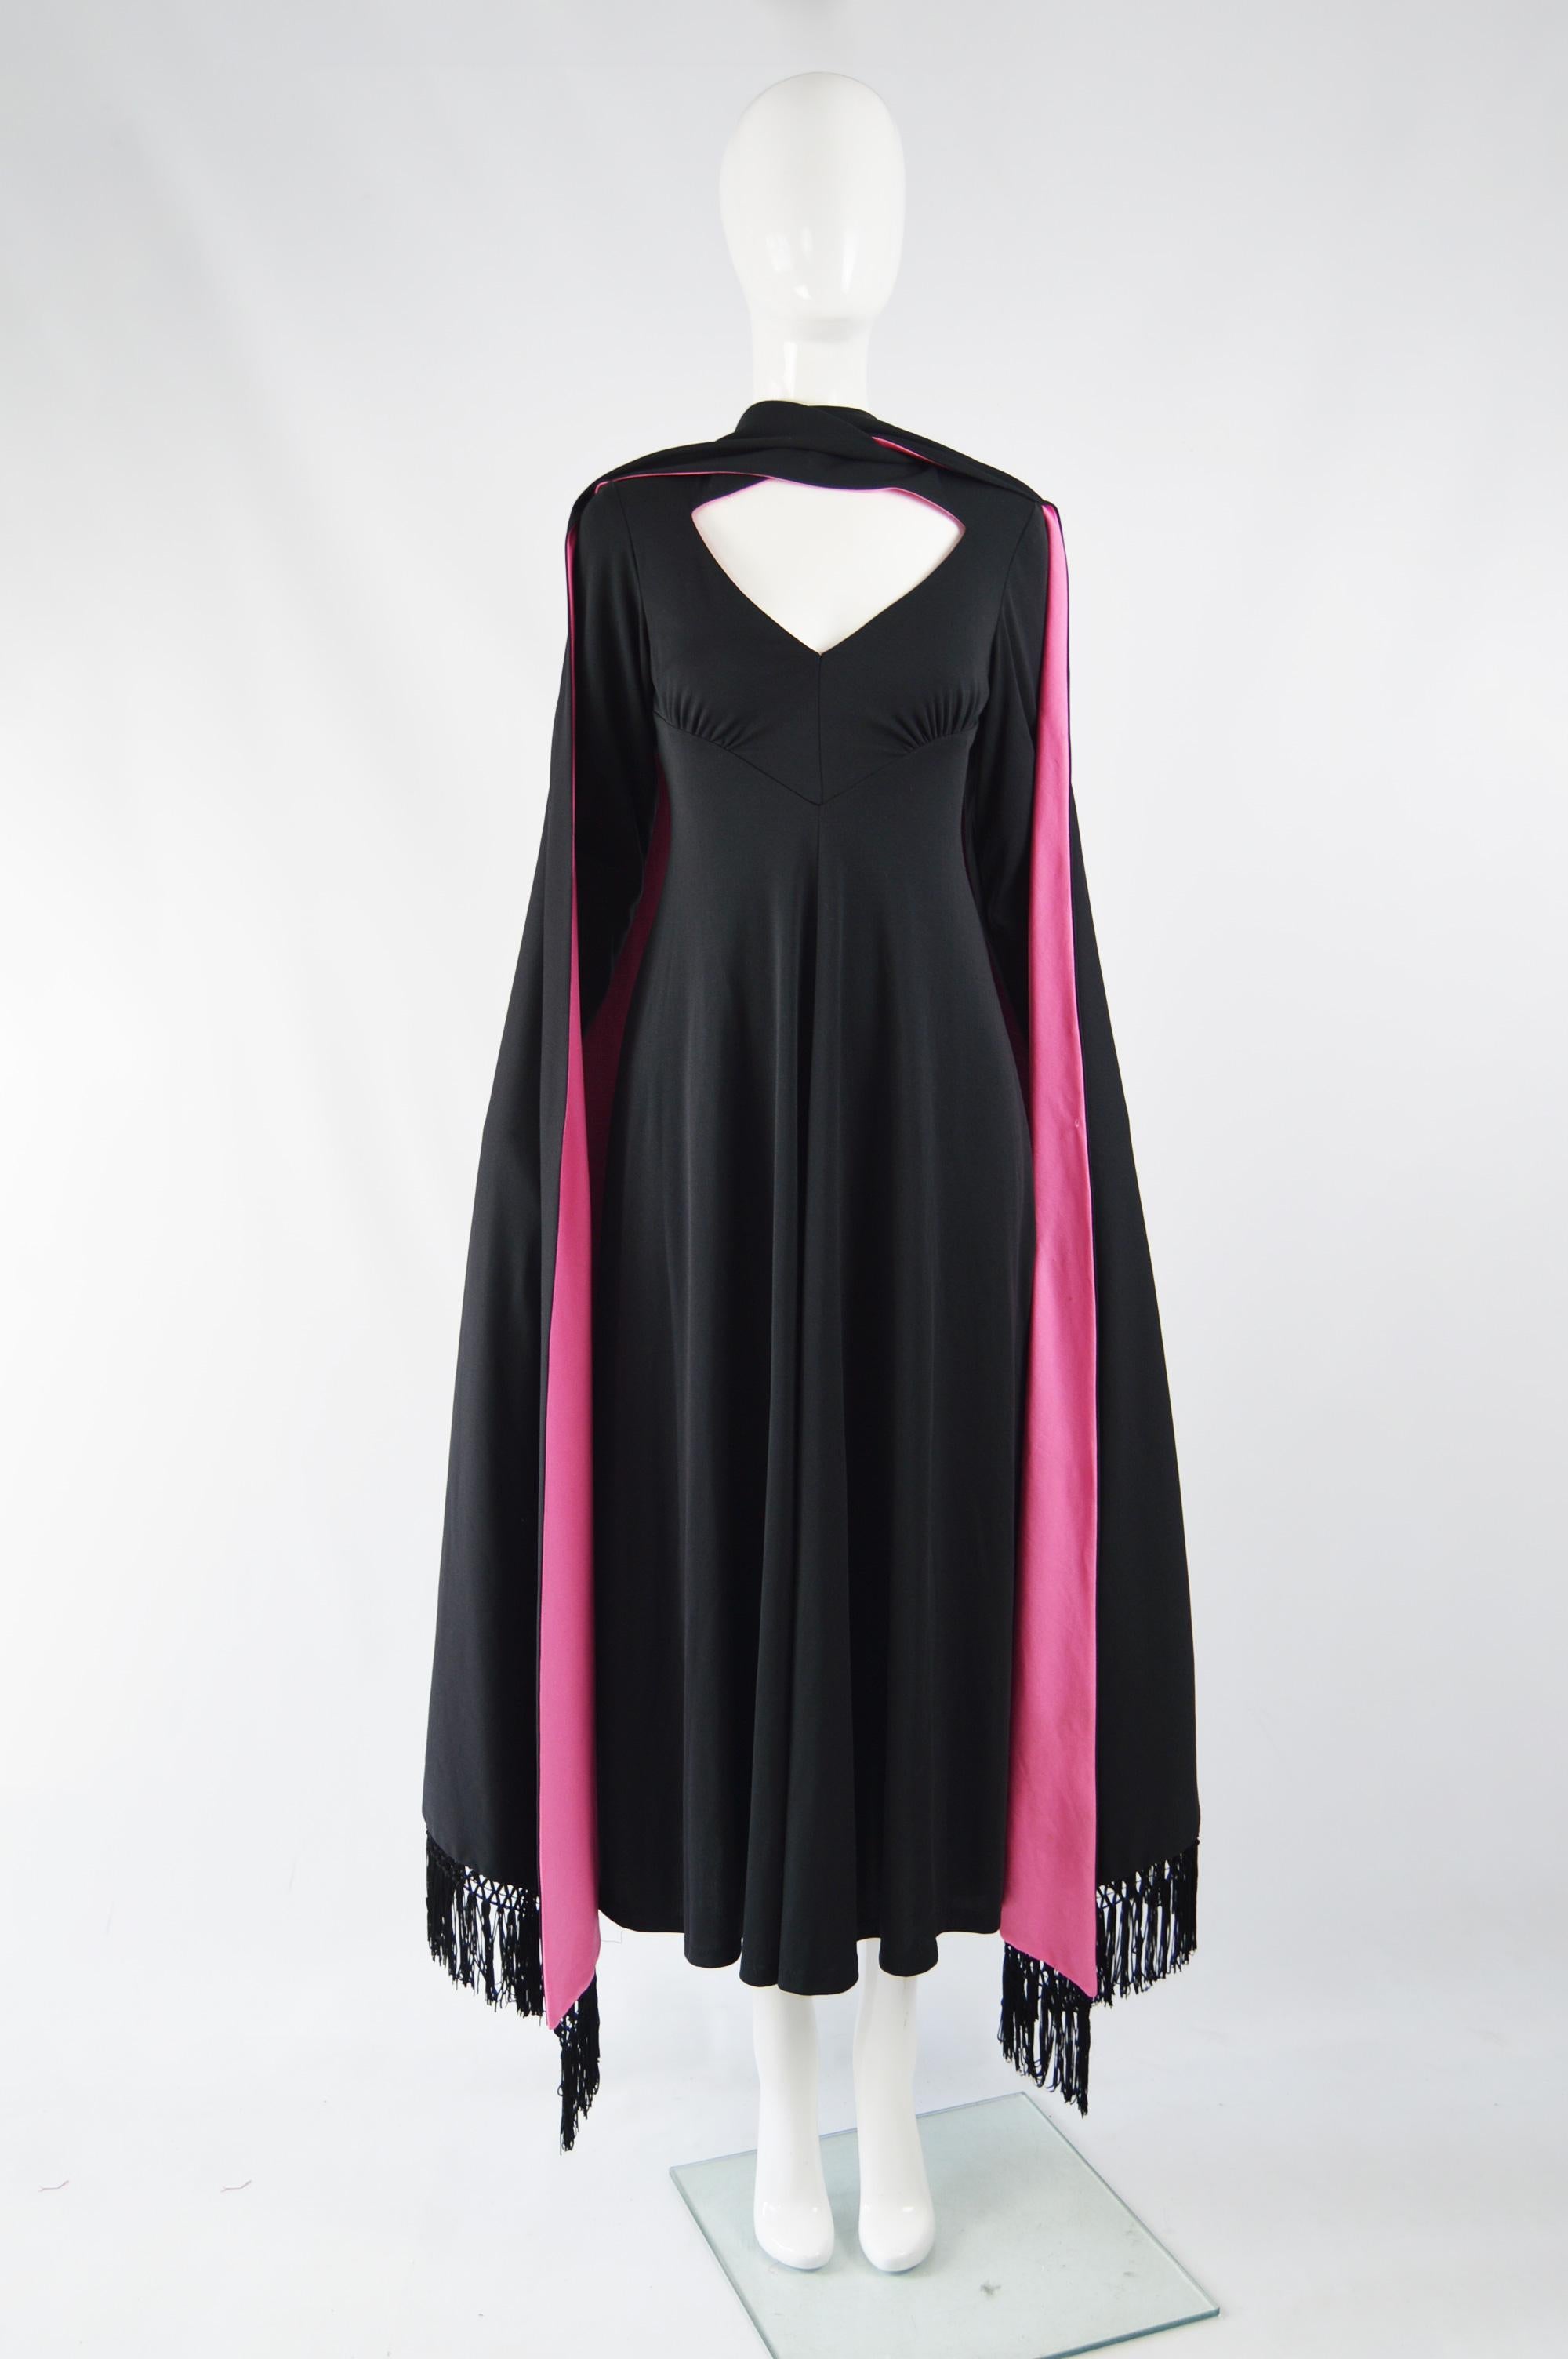 A fabulous vintage womens maxi evening gown from the 70s by quality British label, Ronald Joyce. In a black and pink synthetic jersey with long, fringed cape / train details at the back of either shoulder. Perfect for a red carpet or formal party,